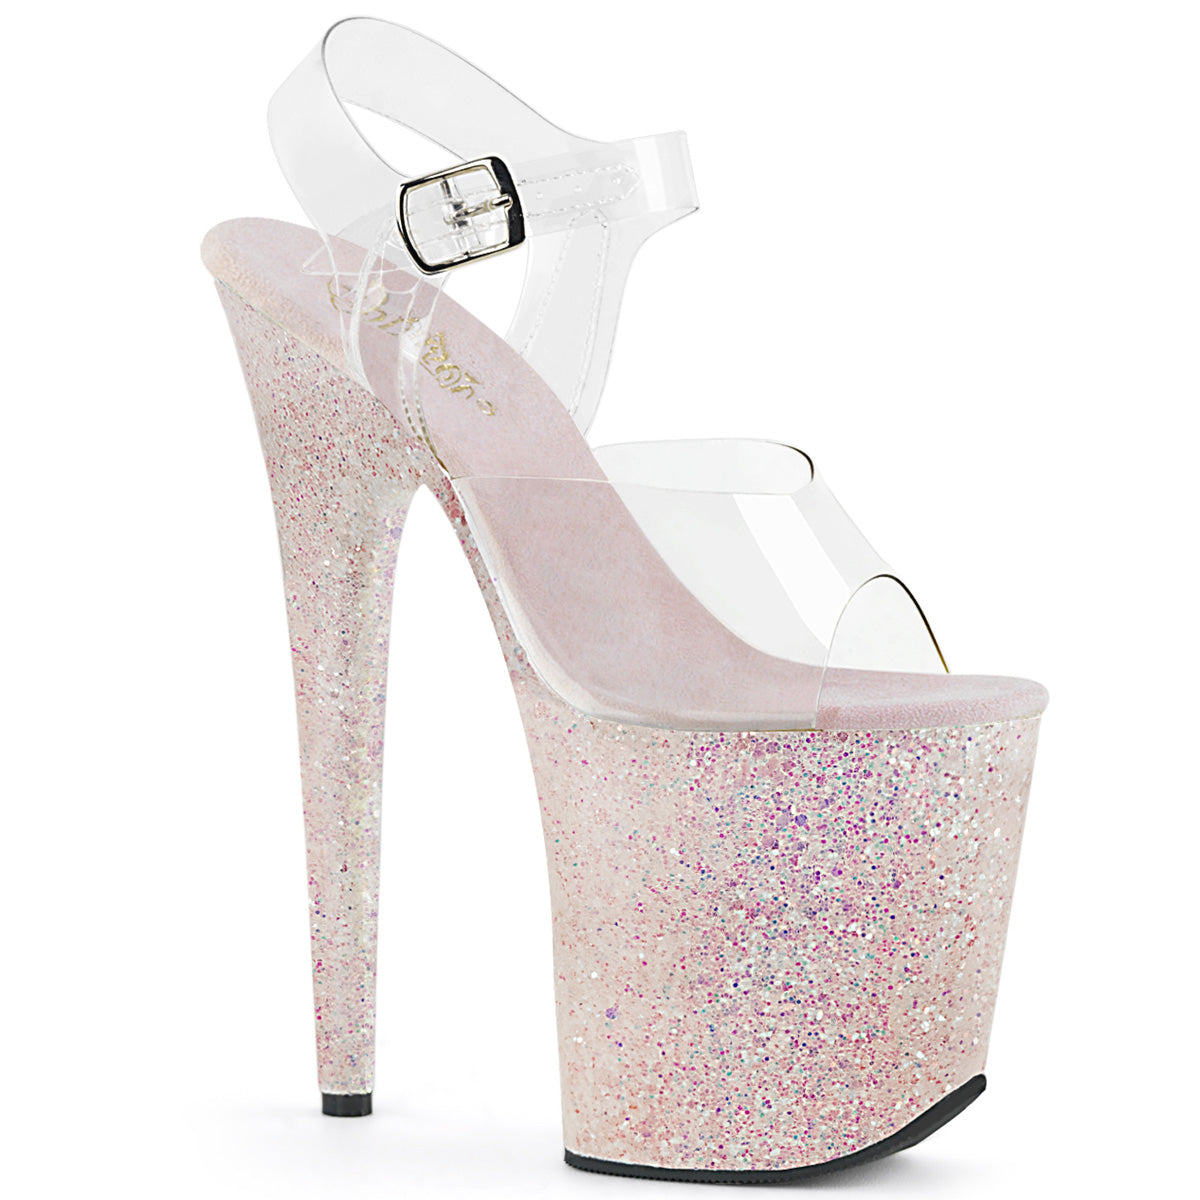 FLAMINGO-808LG Pleaser 8" Heel Clear Opal Glitter Sexy Shoes-Pleaser- Sexy Shoes